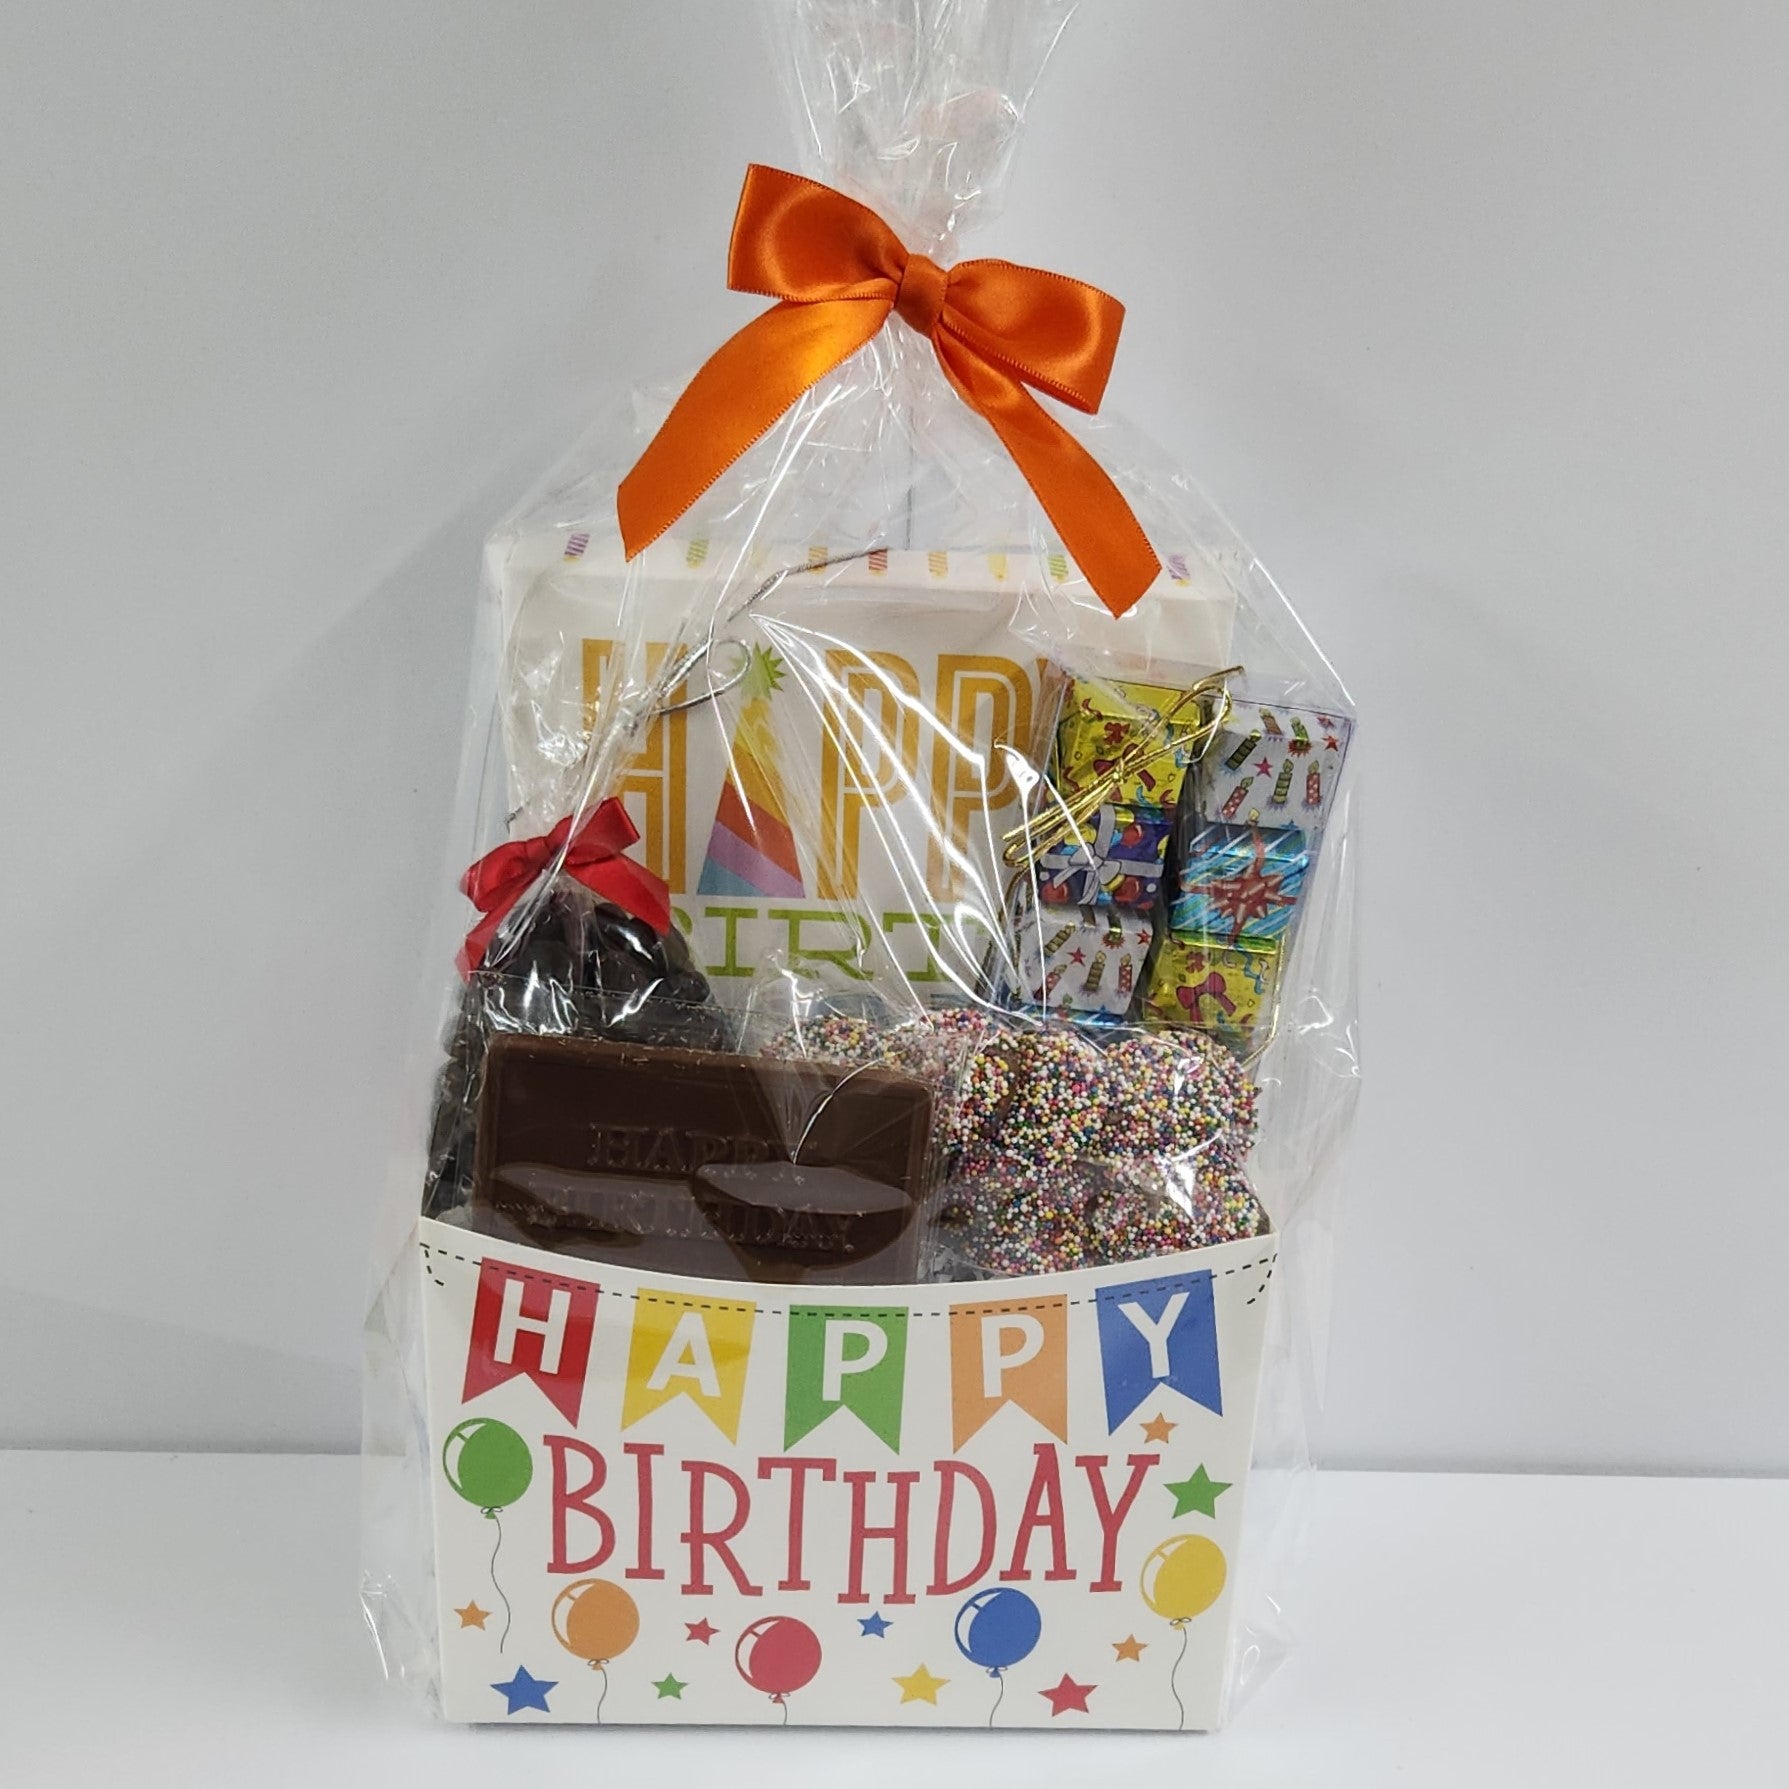 Happy Birthday Candy Gift Basket from Stage Stop Candy wrapped in plastic with an orange bow